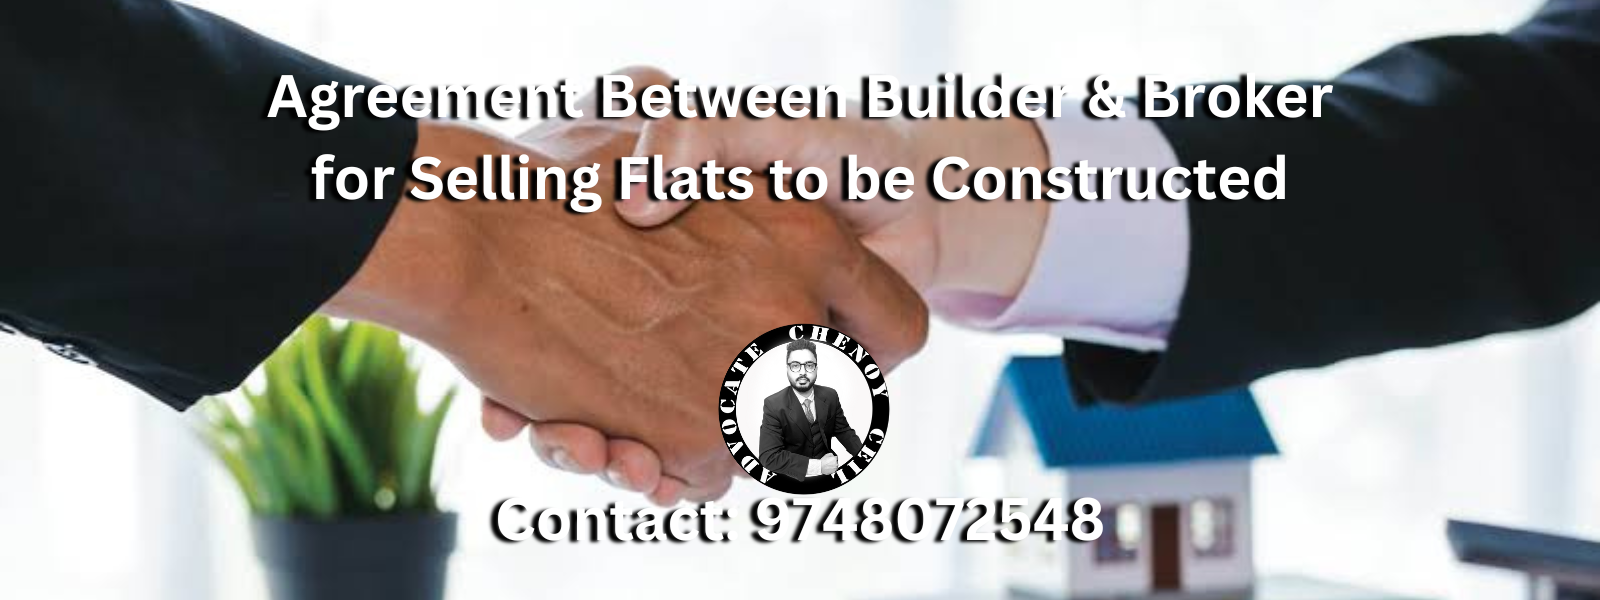 Builder and Broker Agreement for Selling Flats